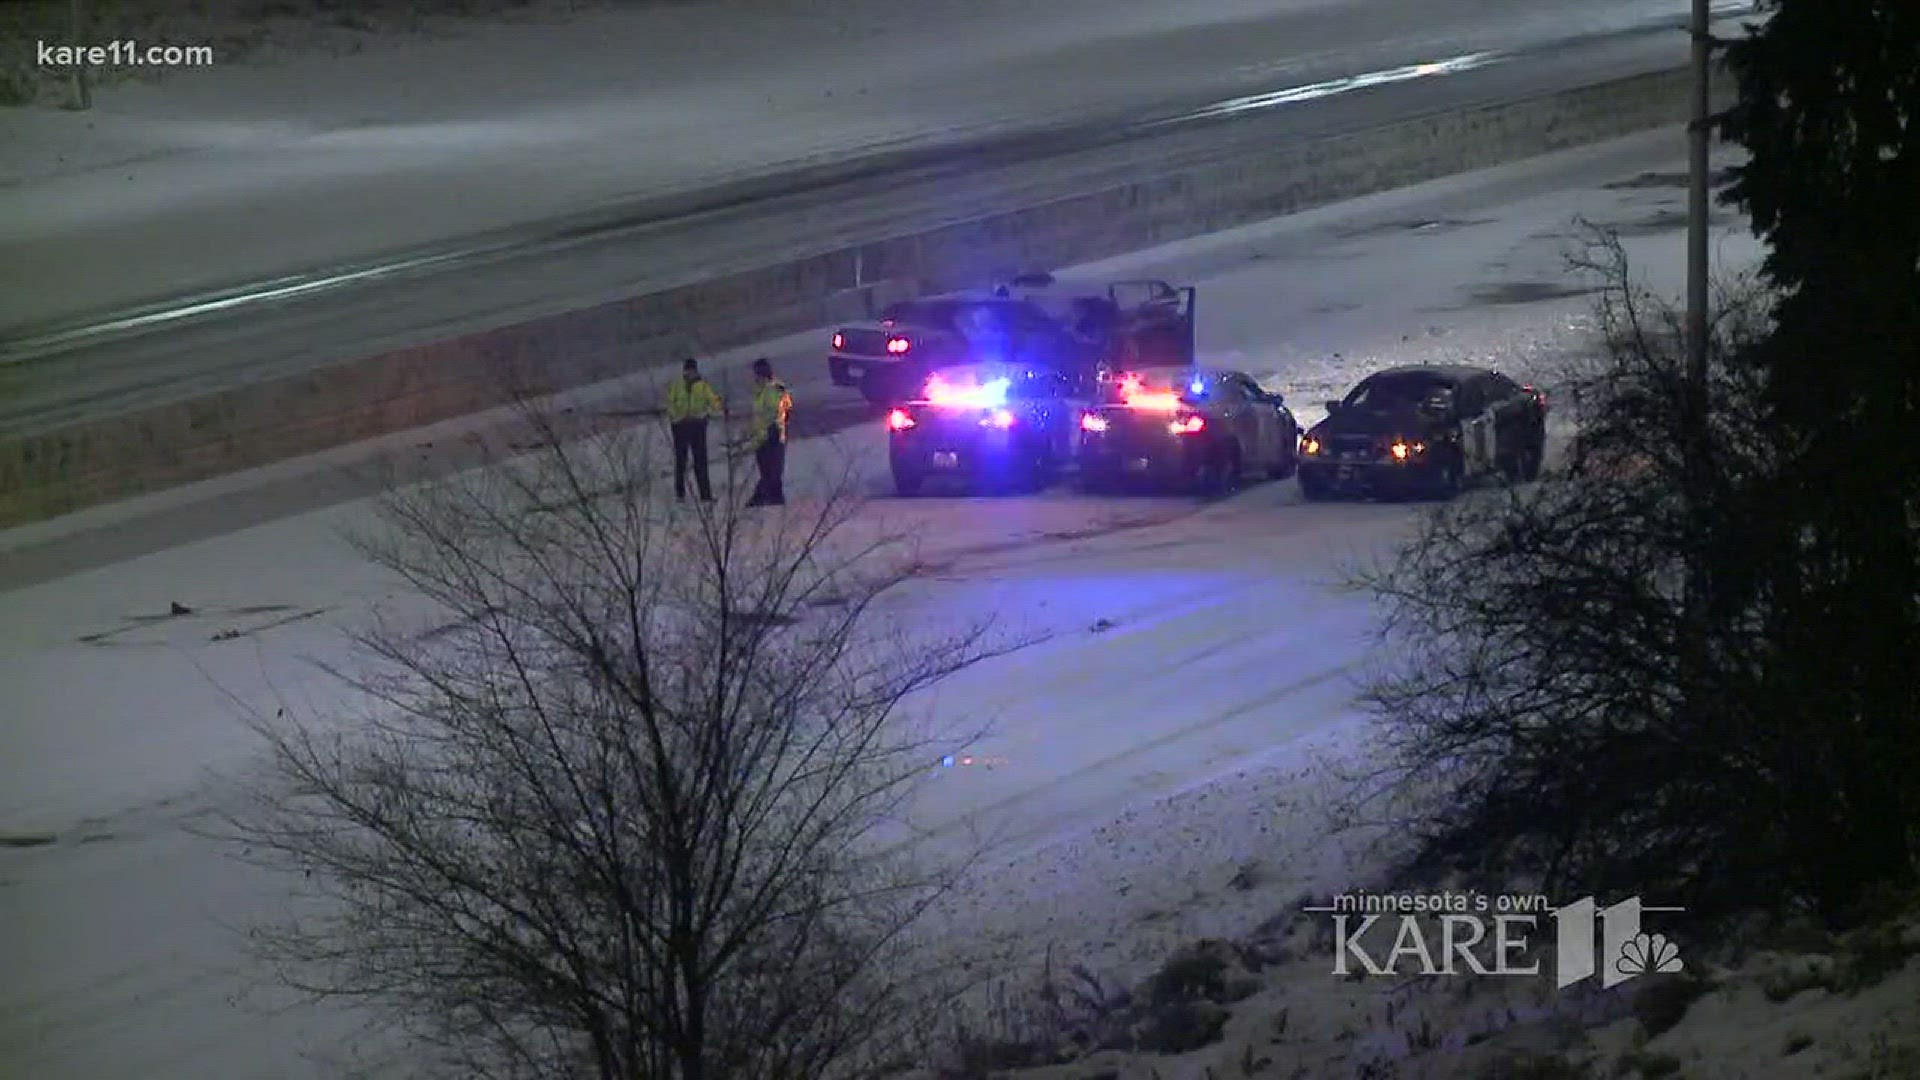 The Minnesota State Patrol report states alcohol was detected on the wrong-way driver. The other driver, also seriously injured, has been identified as a Minnesota National Guard member. http://kare11.tv/2ALPUL8